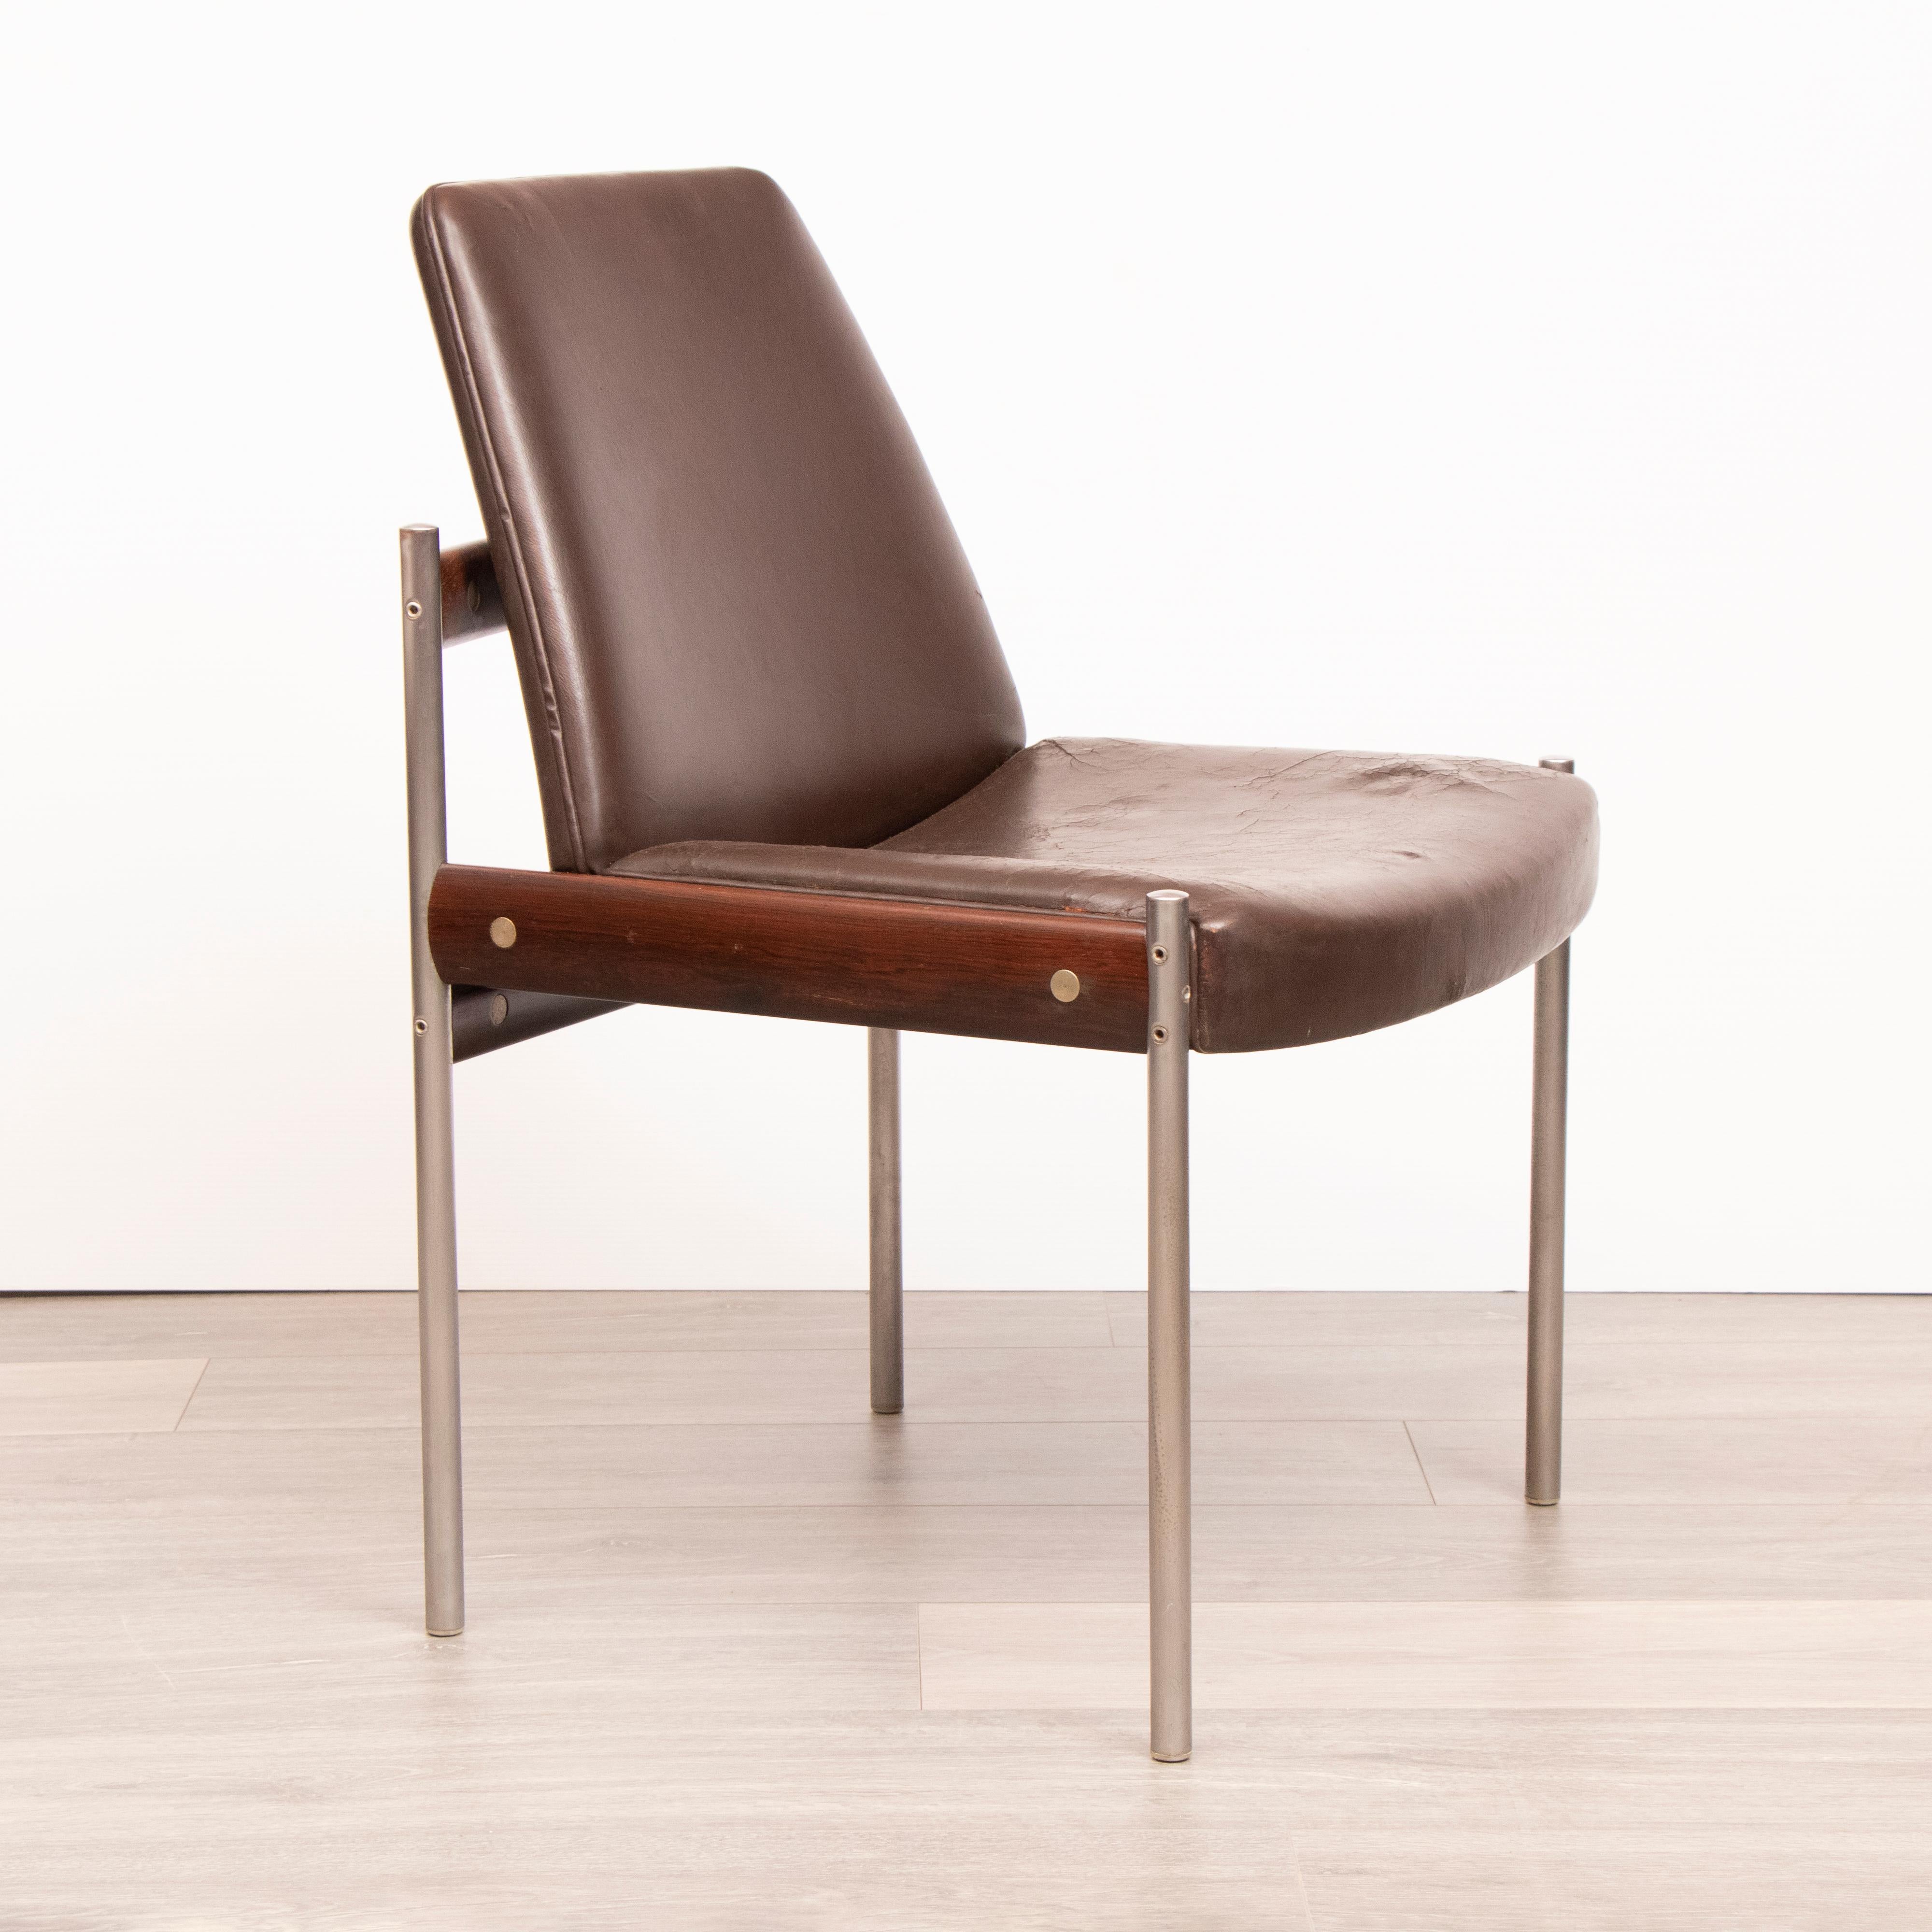 Set of 4 original dining chairs designed by Sven Ivar Dysthe and manufactured by Dokka Mobler in Norway. The frame is manufactured from a combination of Rosewood, chrome-plated metal tubes and brown leather upholstery.

The original brown leather